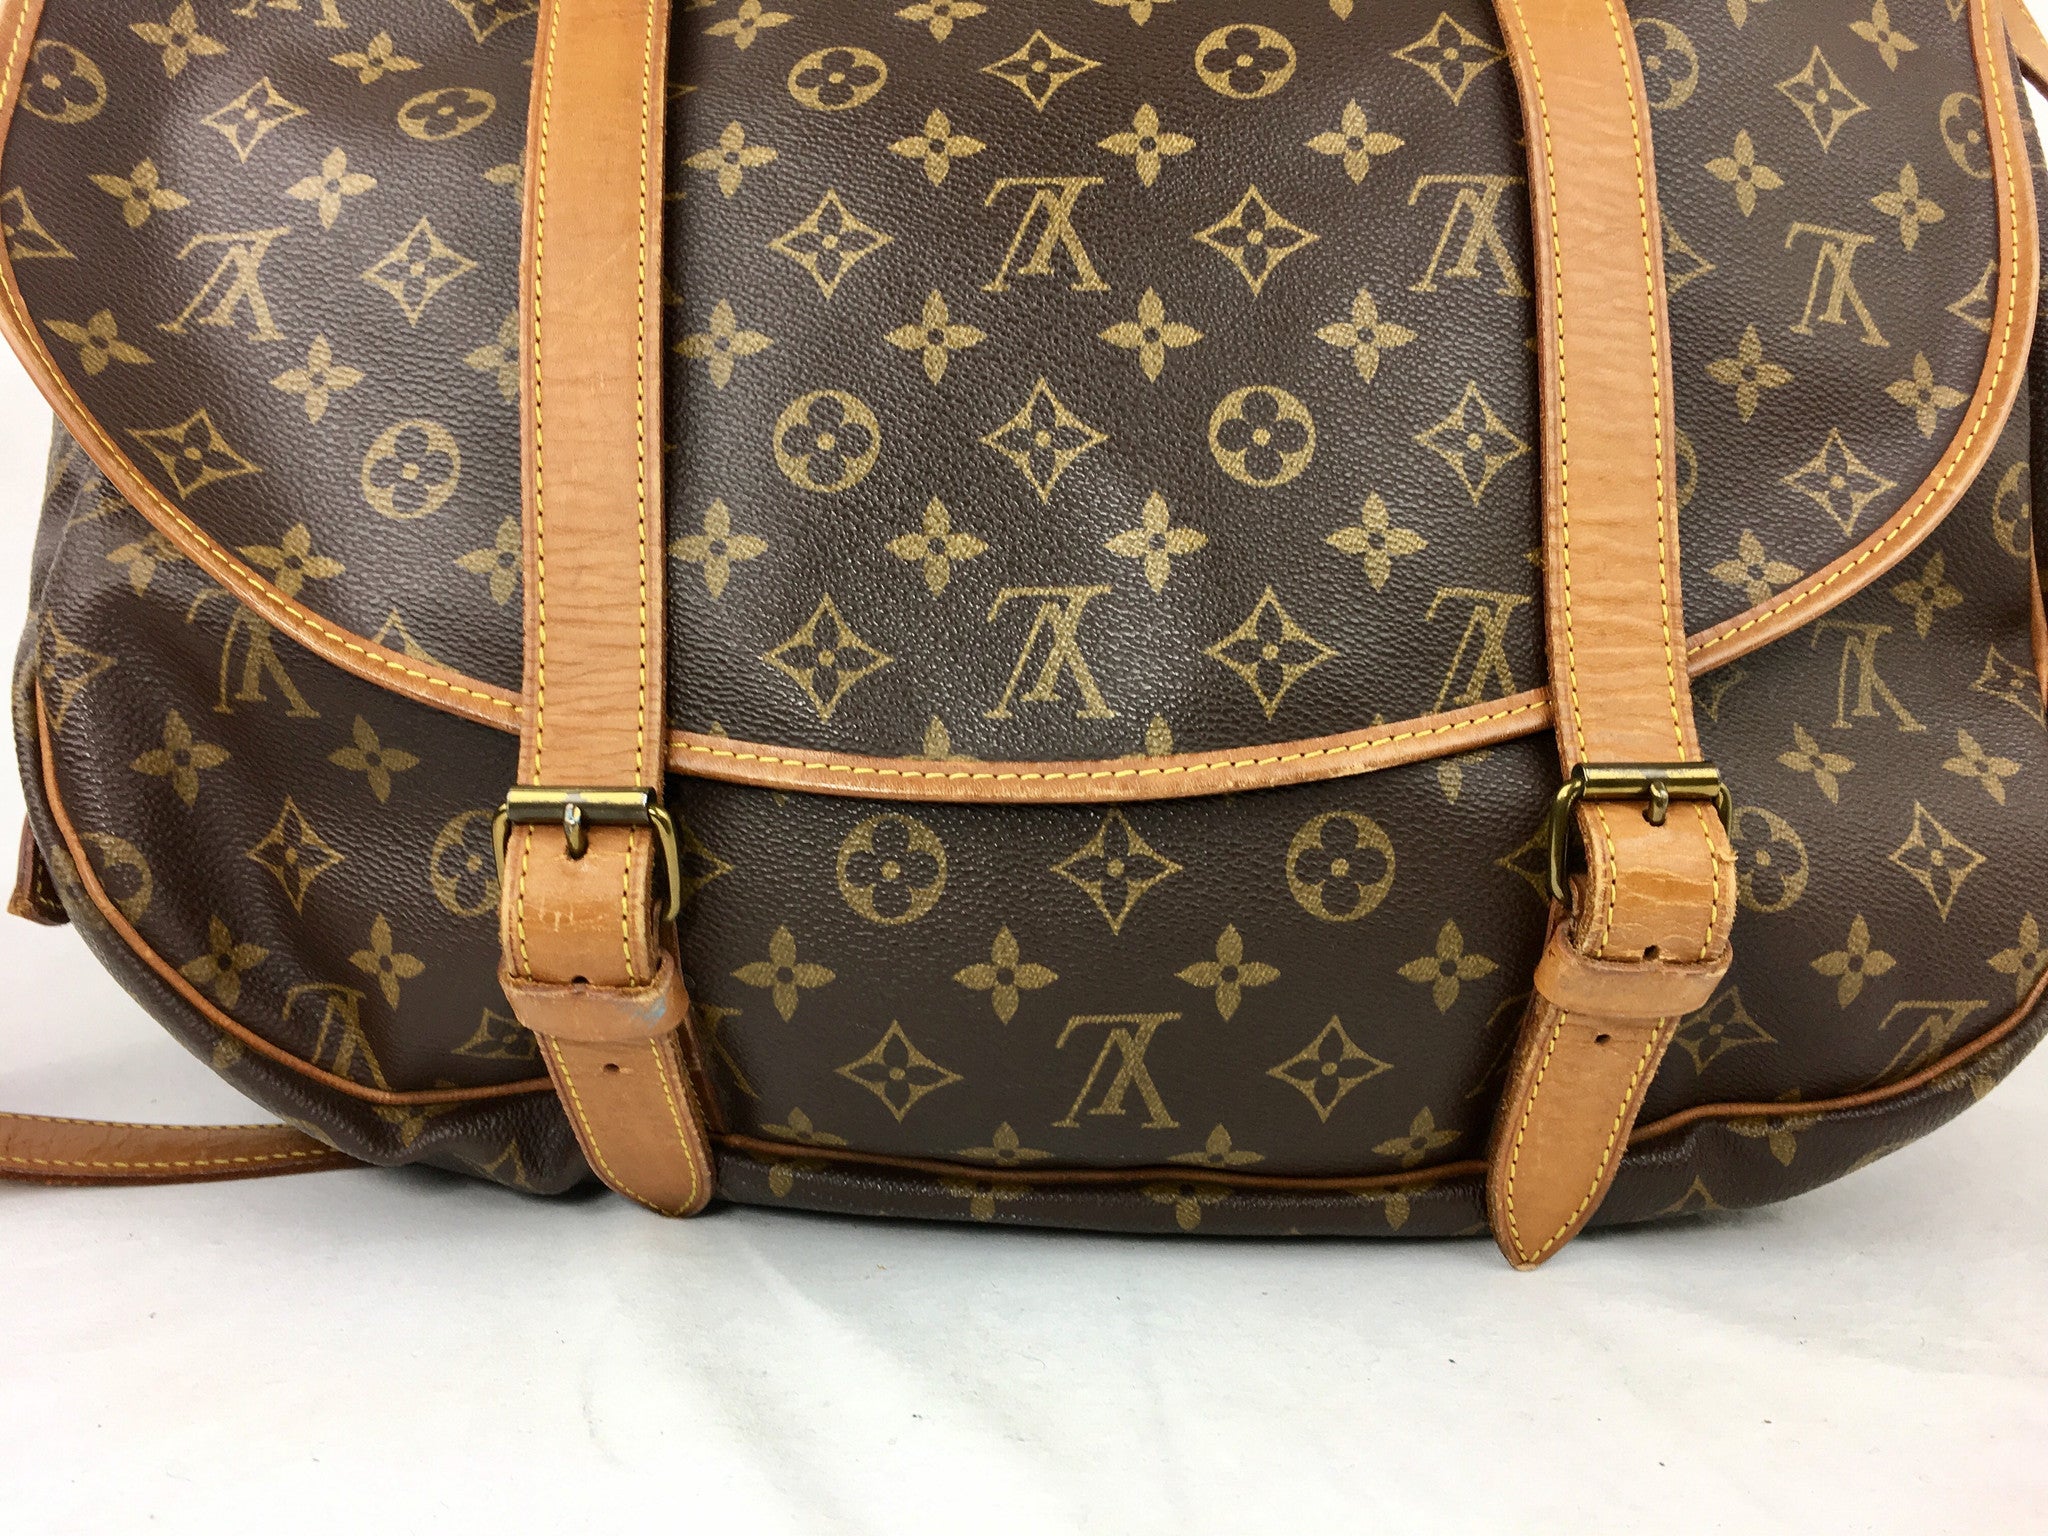 Buy Authentic Pre-owned Louis Vuitton Saumur 43 GM Compartment Messenger  Crossbody Bag M42252 140385 from Japan - Buy authentic Plus exclusive items  from Japan